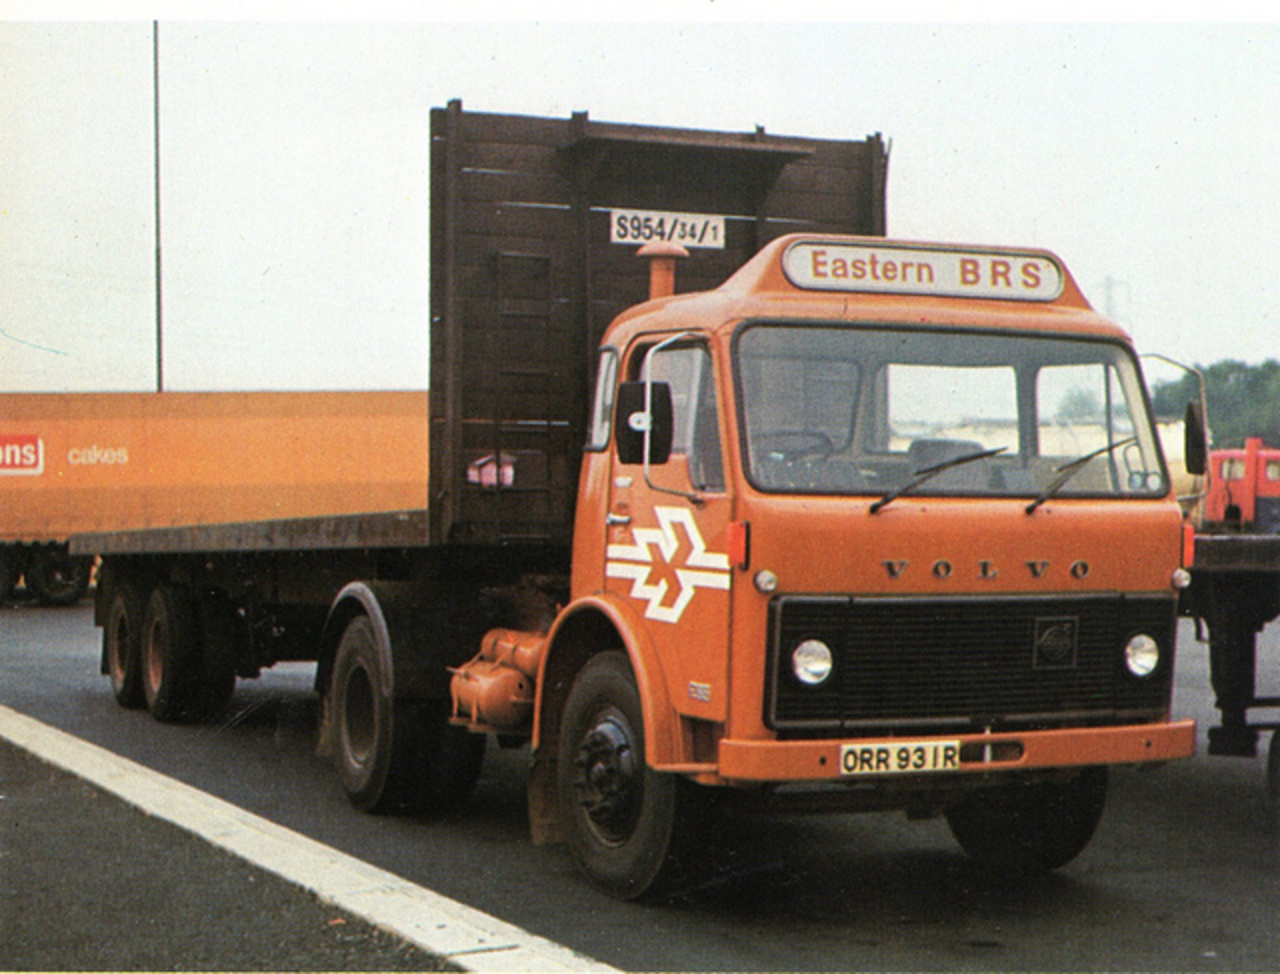 1976/77 Volvo F86 Eastern BRS | Flickr - Photo Sharing!